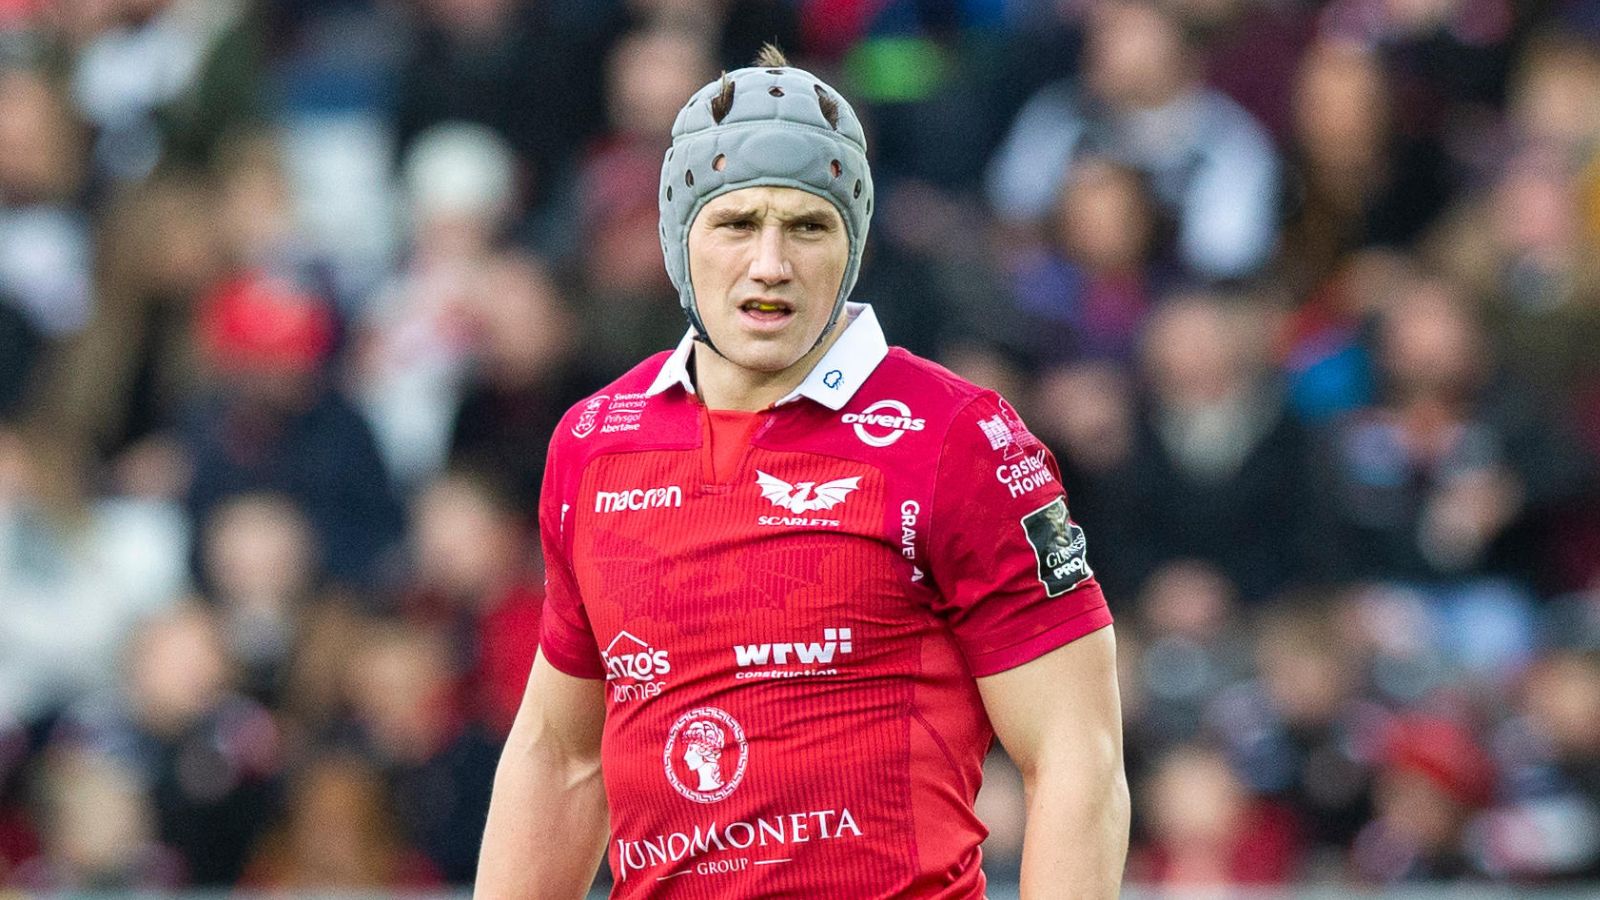 wales legend jonathan davies open to ‘another opportunity’ after scarlets exit